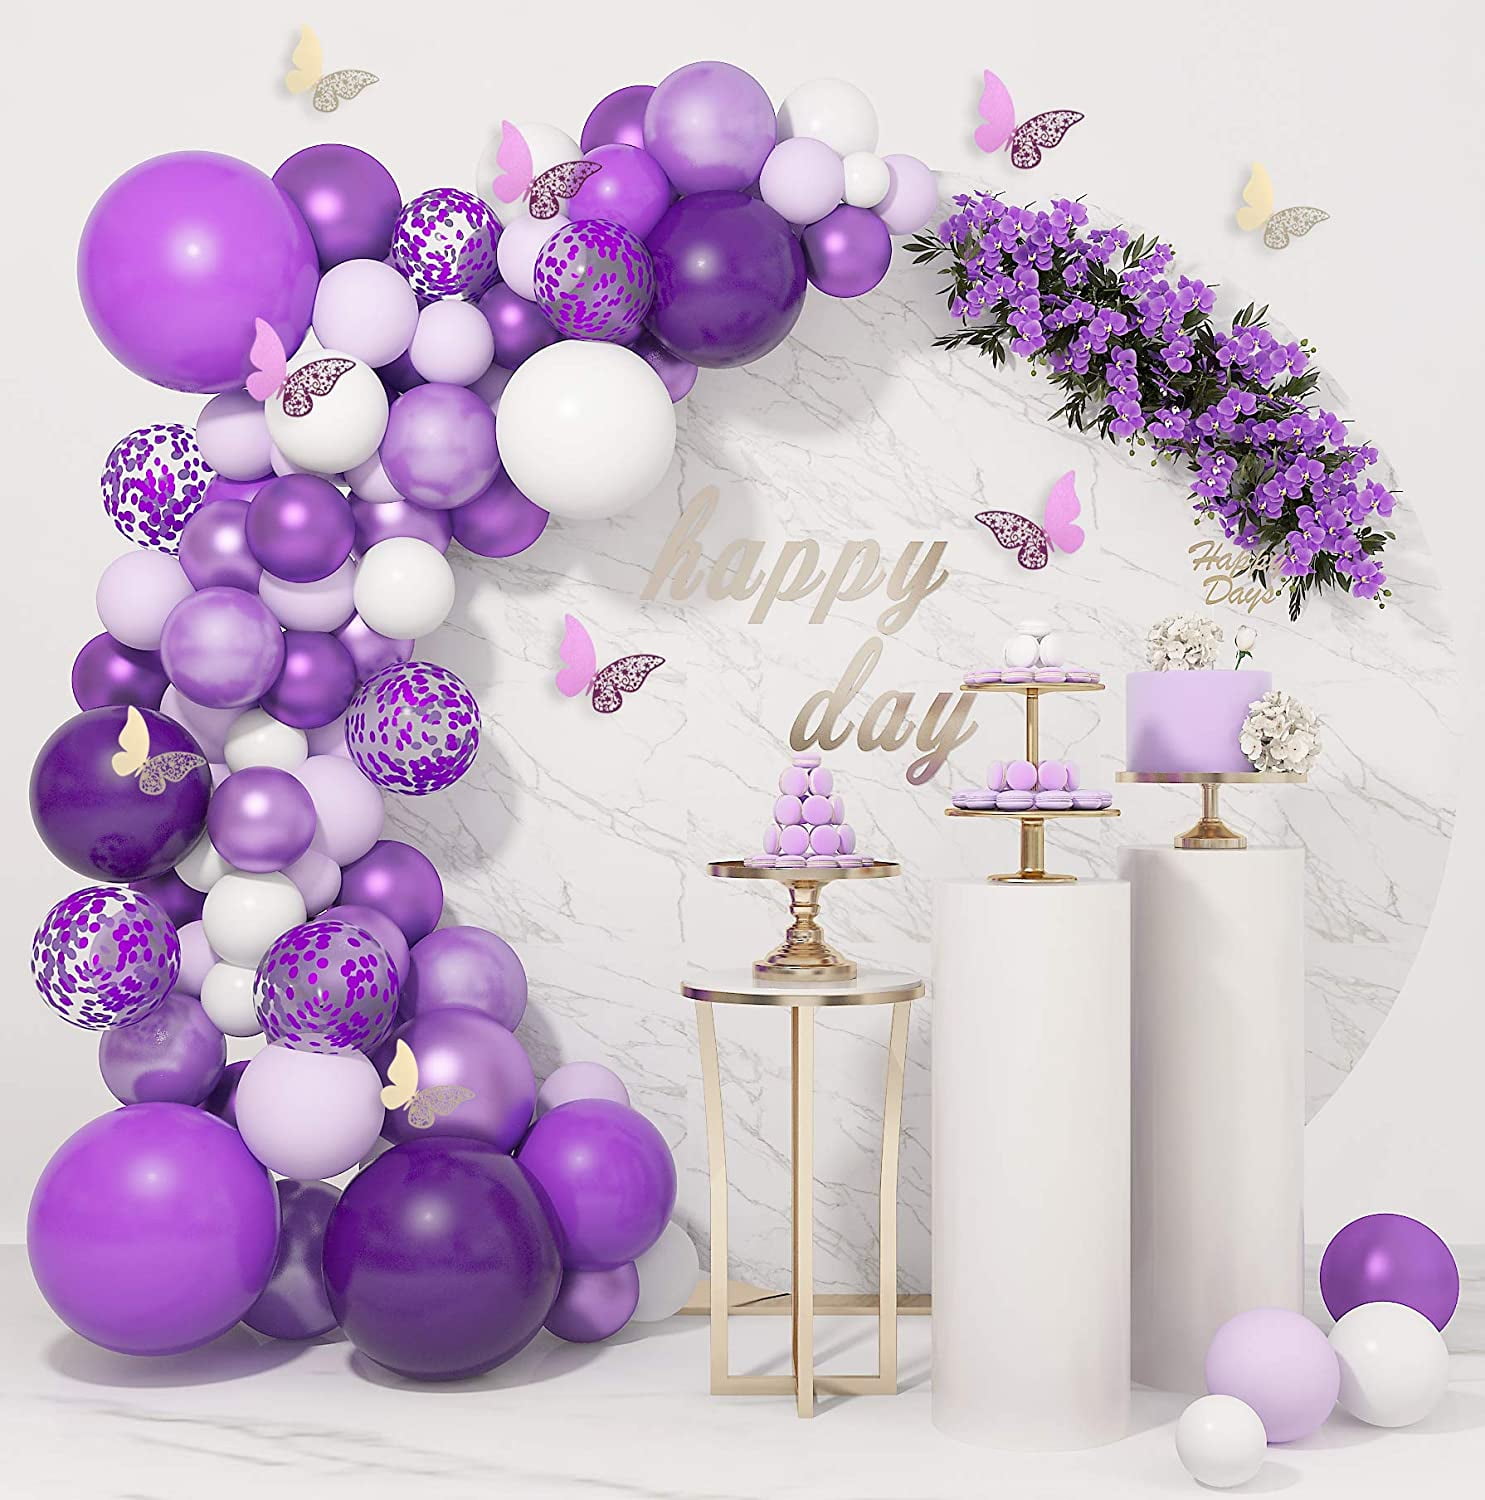 Special Events Balloon Table Arch Set for Birthdays Anniversaries 12-inch Diameter Balloons Weddings Baby Showers Corporate Events Balloon Arch Kit with 40 White and 40 Silver Balloons